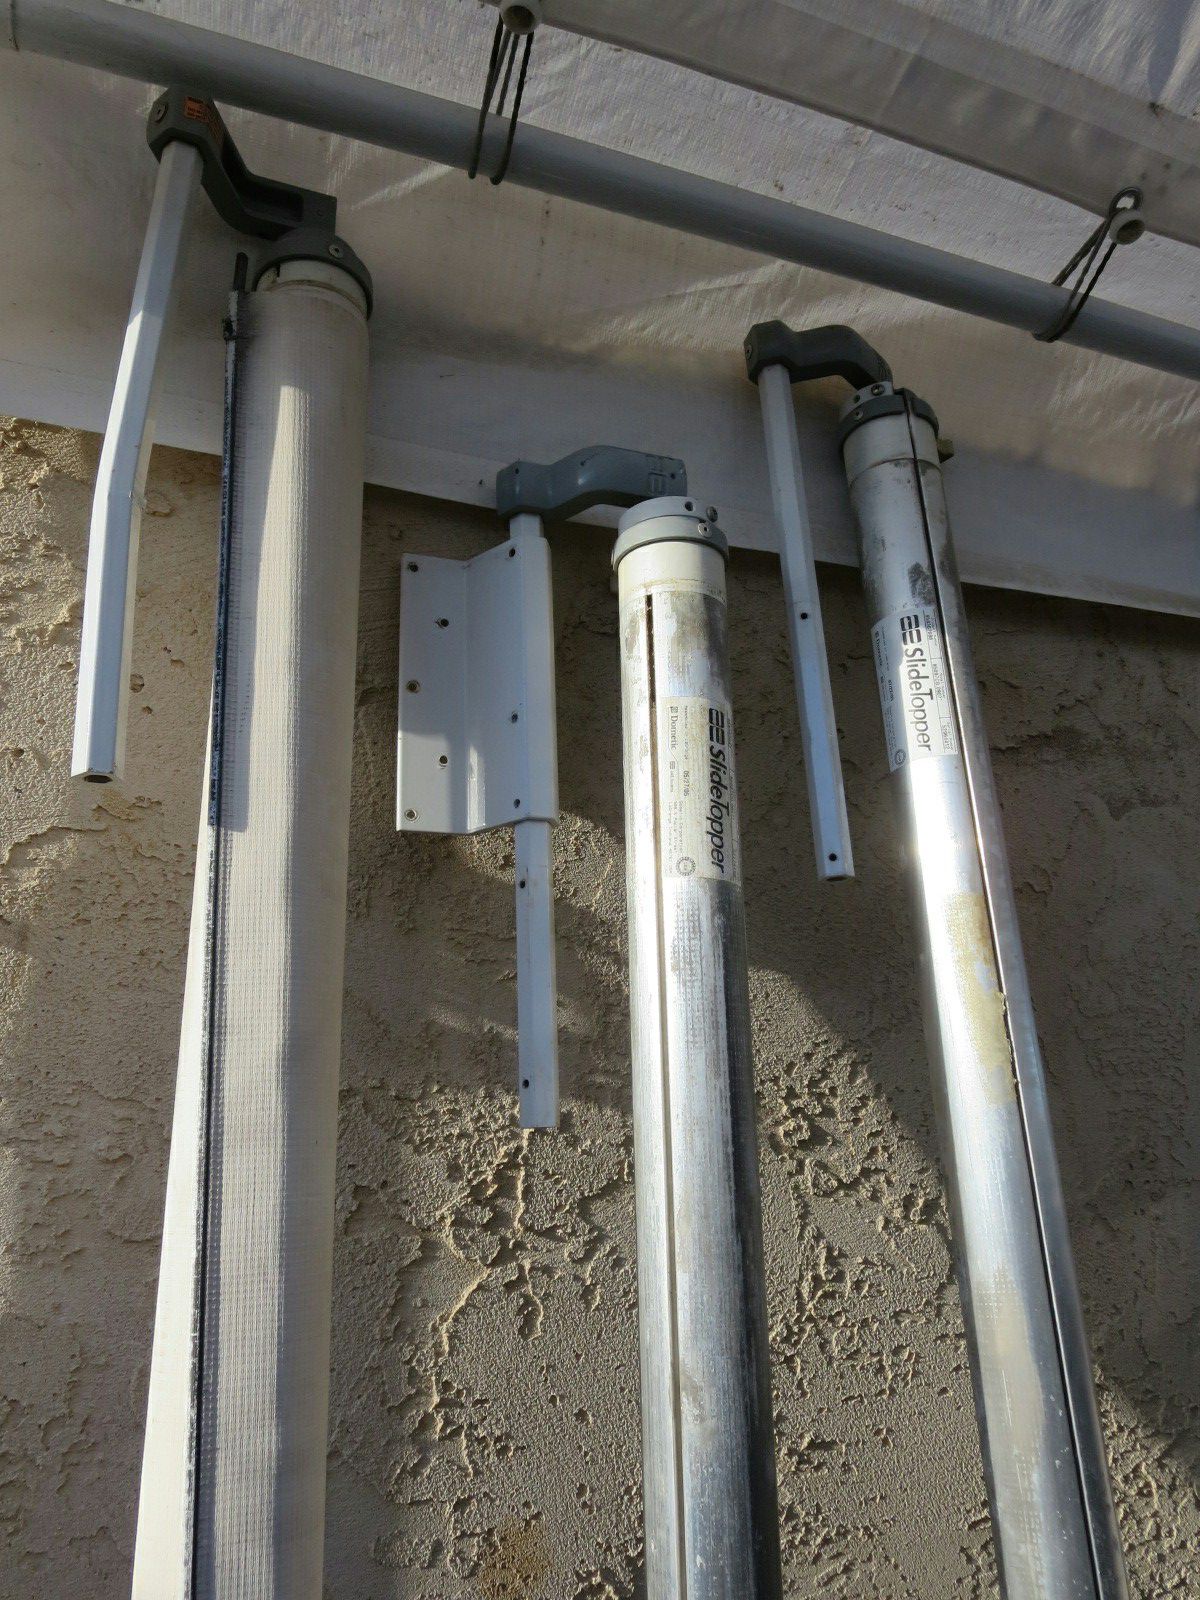 Awning cover tubes